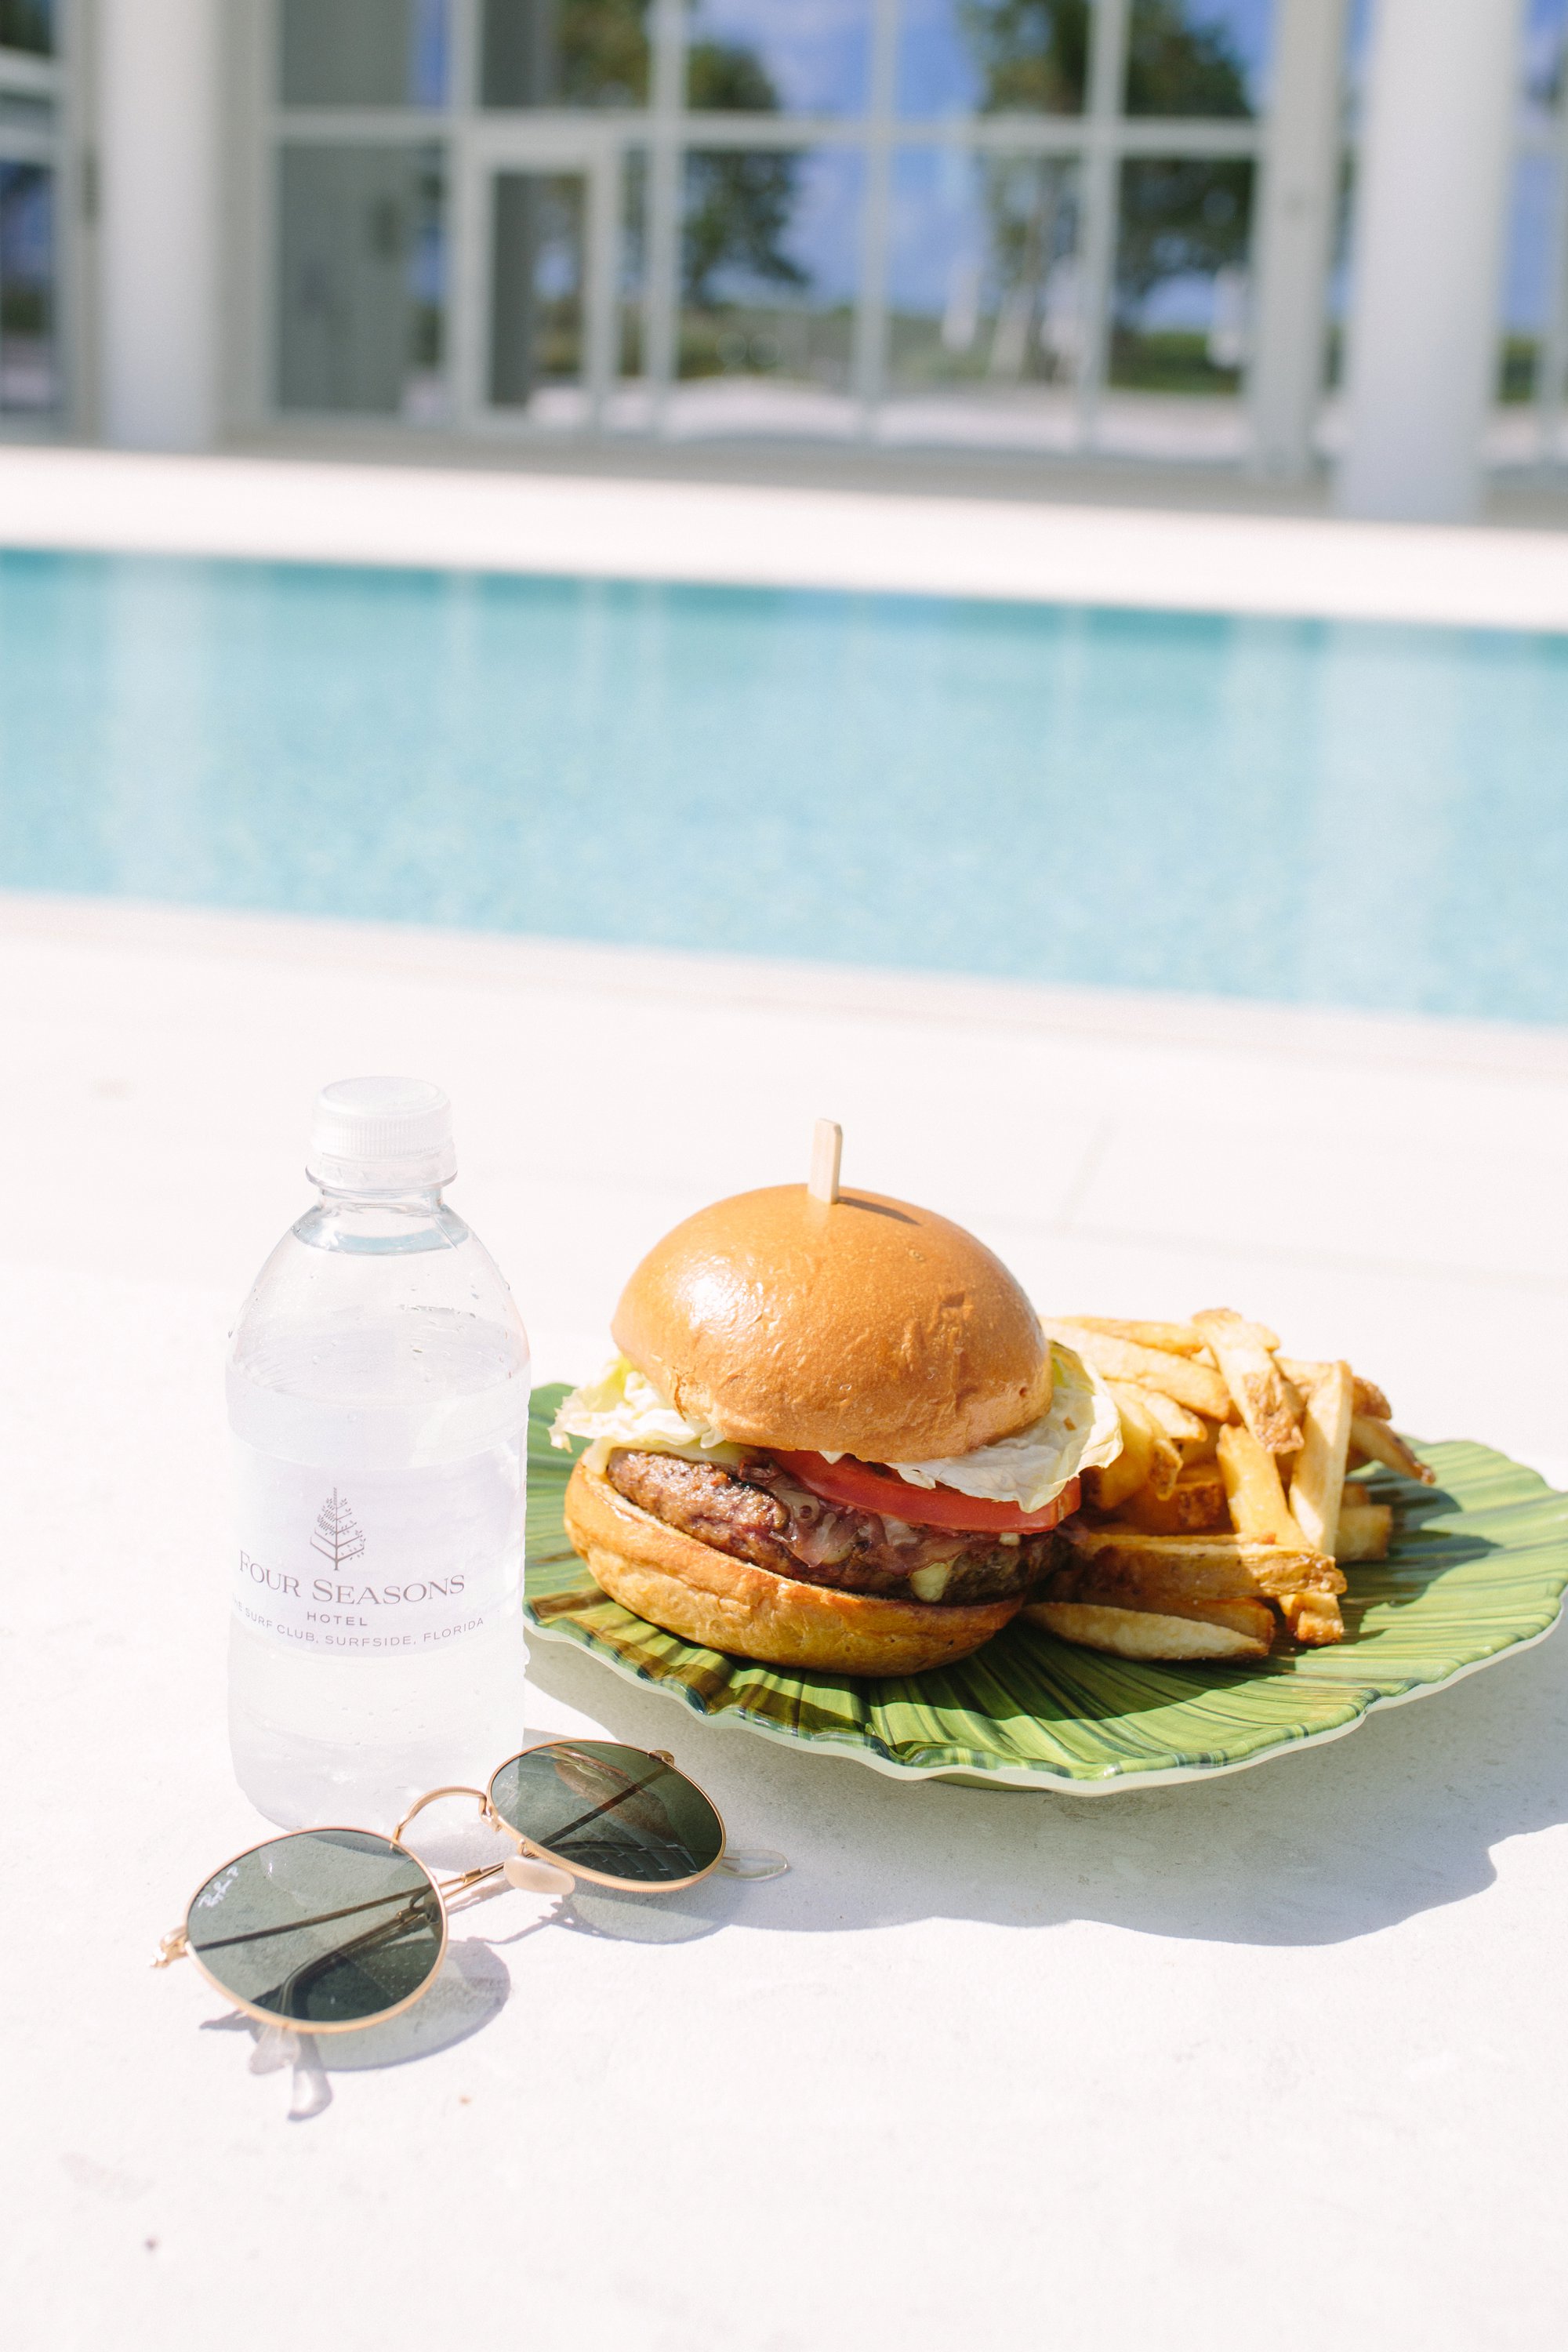 Burger by the pool at Four Seasons Hotel Surfside